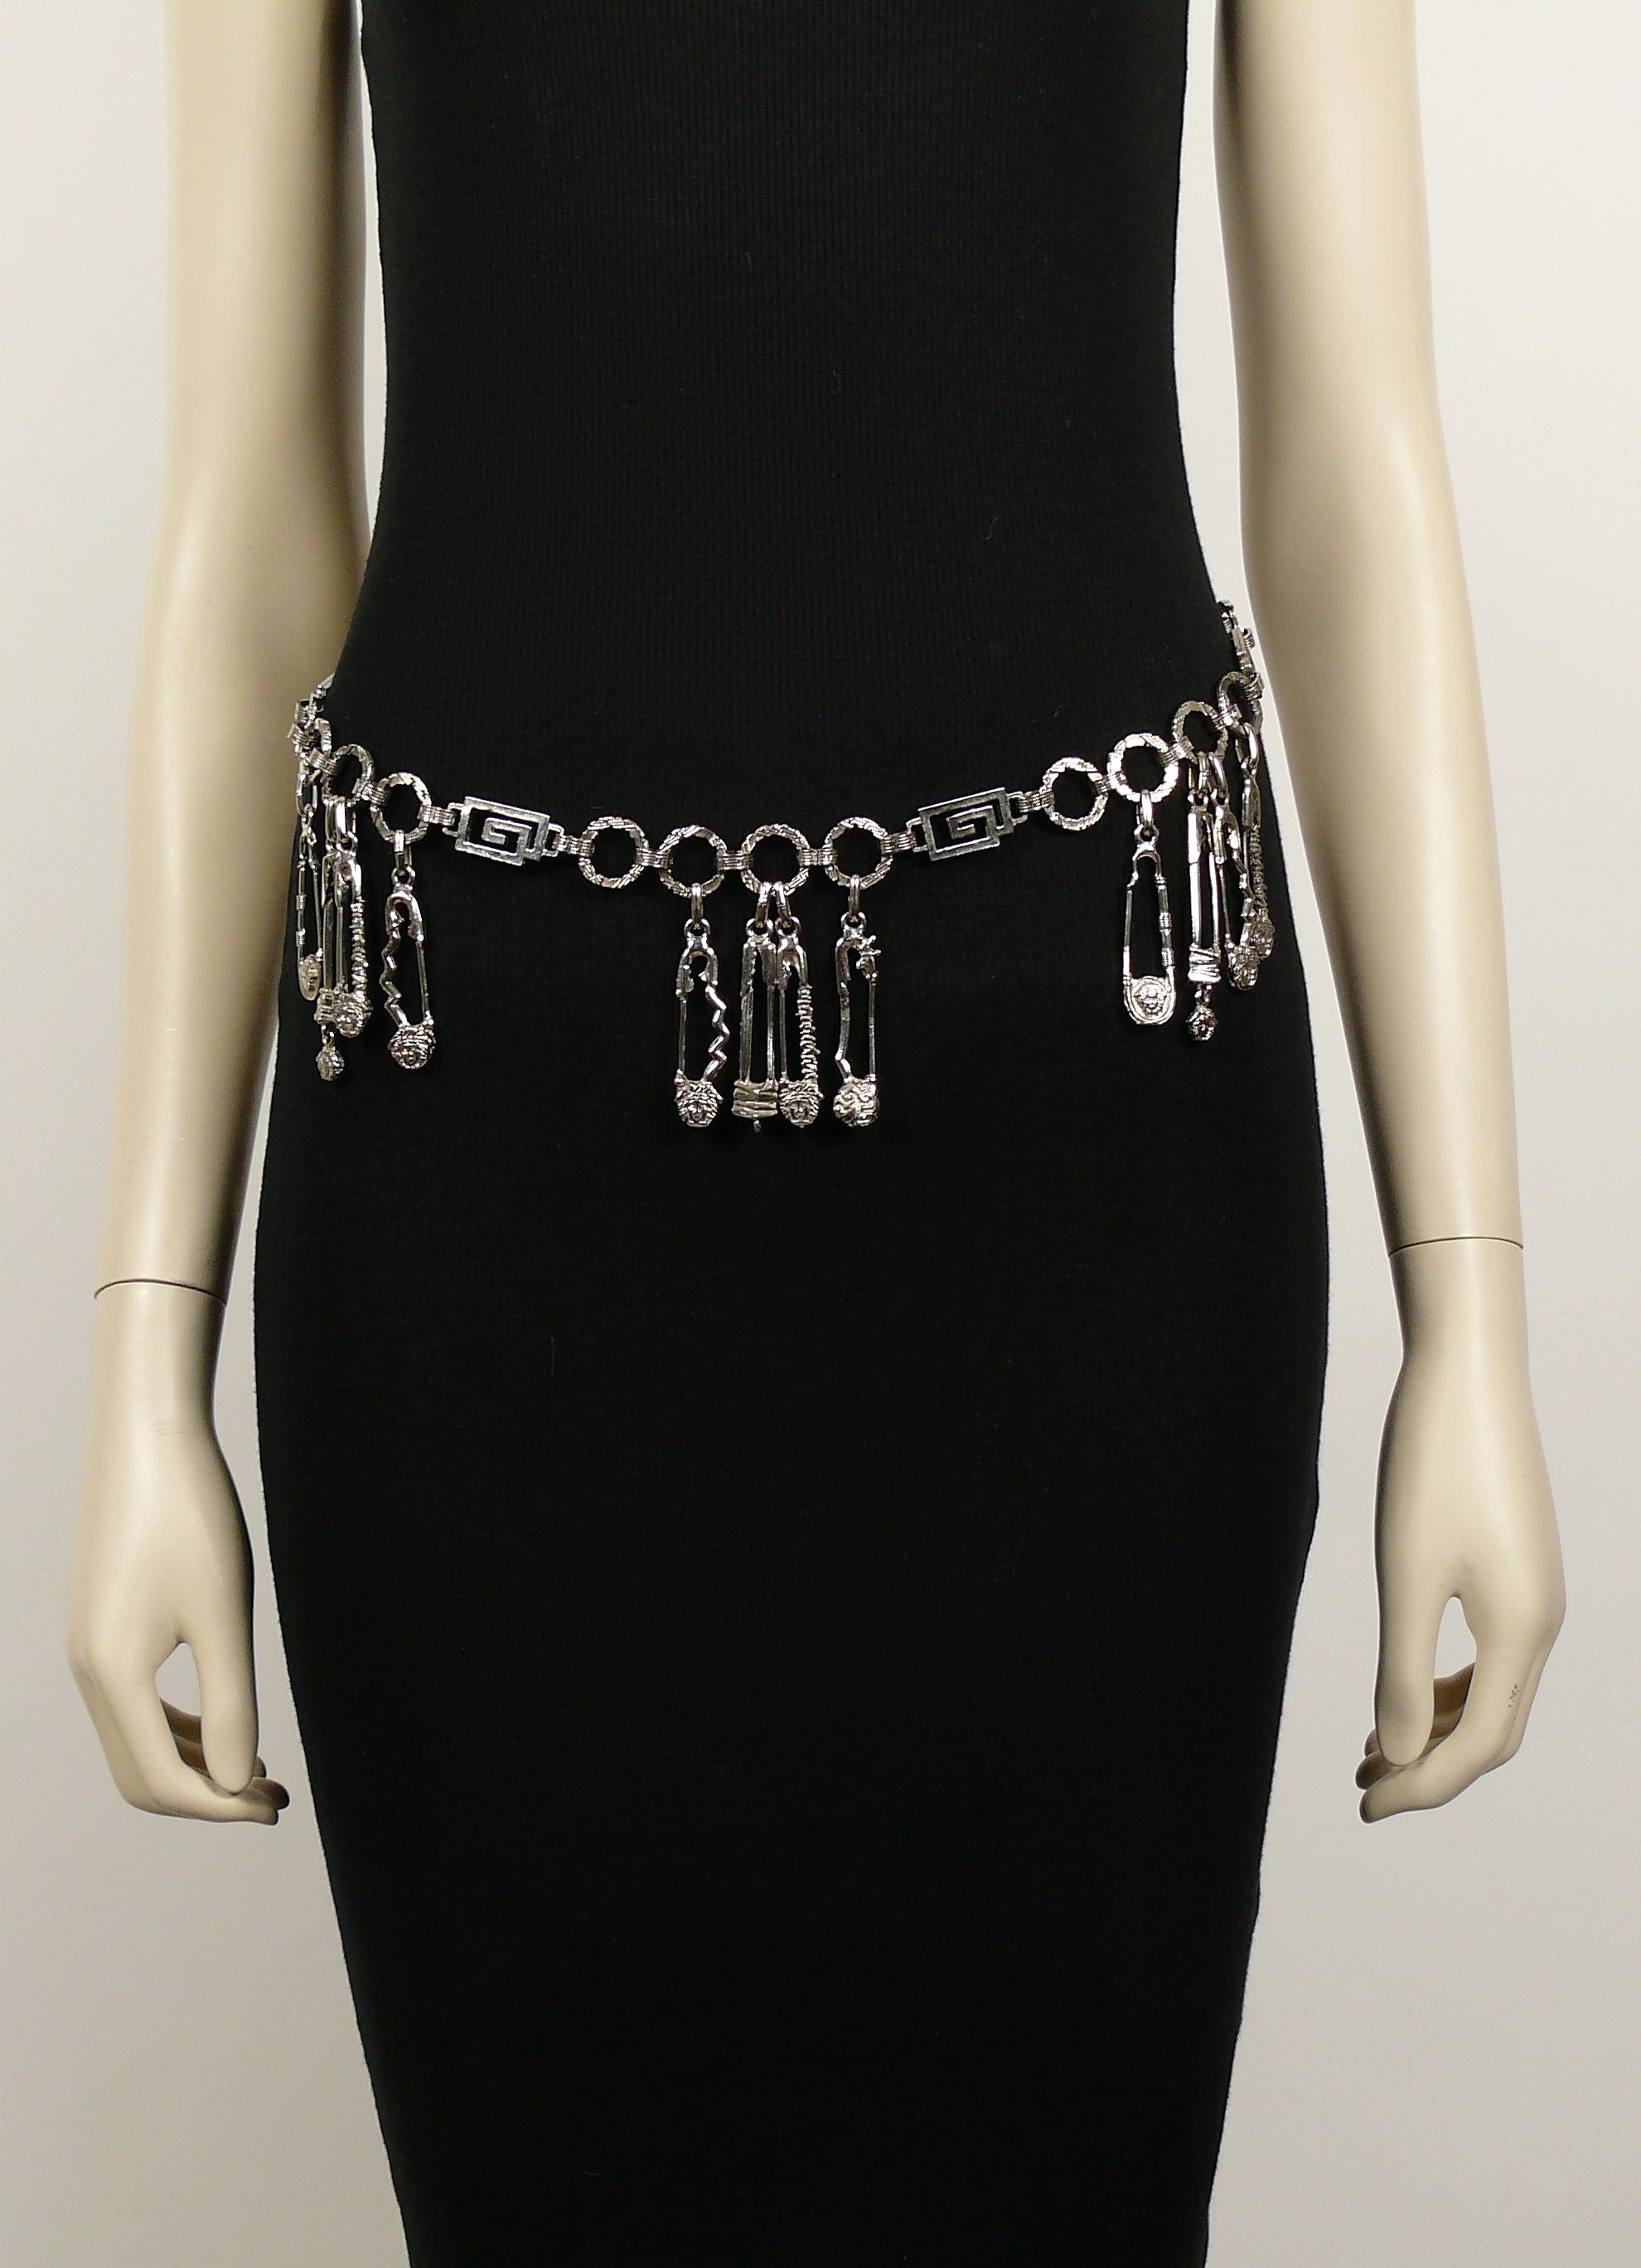 GIANNI VERSACE iconic silver toned chain link belt featuring safety pins and Medusas heads.

Can be worn as a necklace.

Embossed GIANNI VERSACE Made in Italy.

Indicative measurements : adjustable length from approx. 76 cm (29.92 inches) to approx.